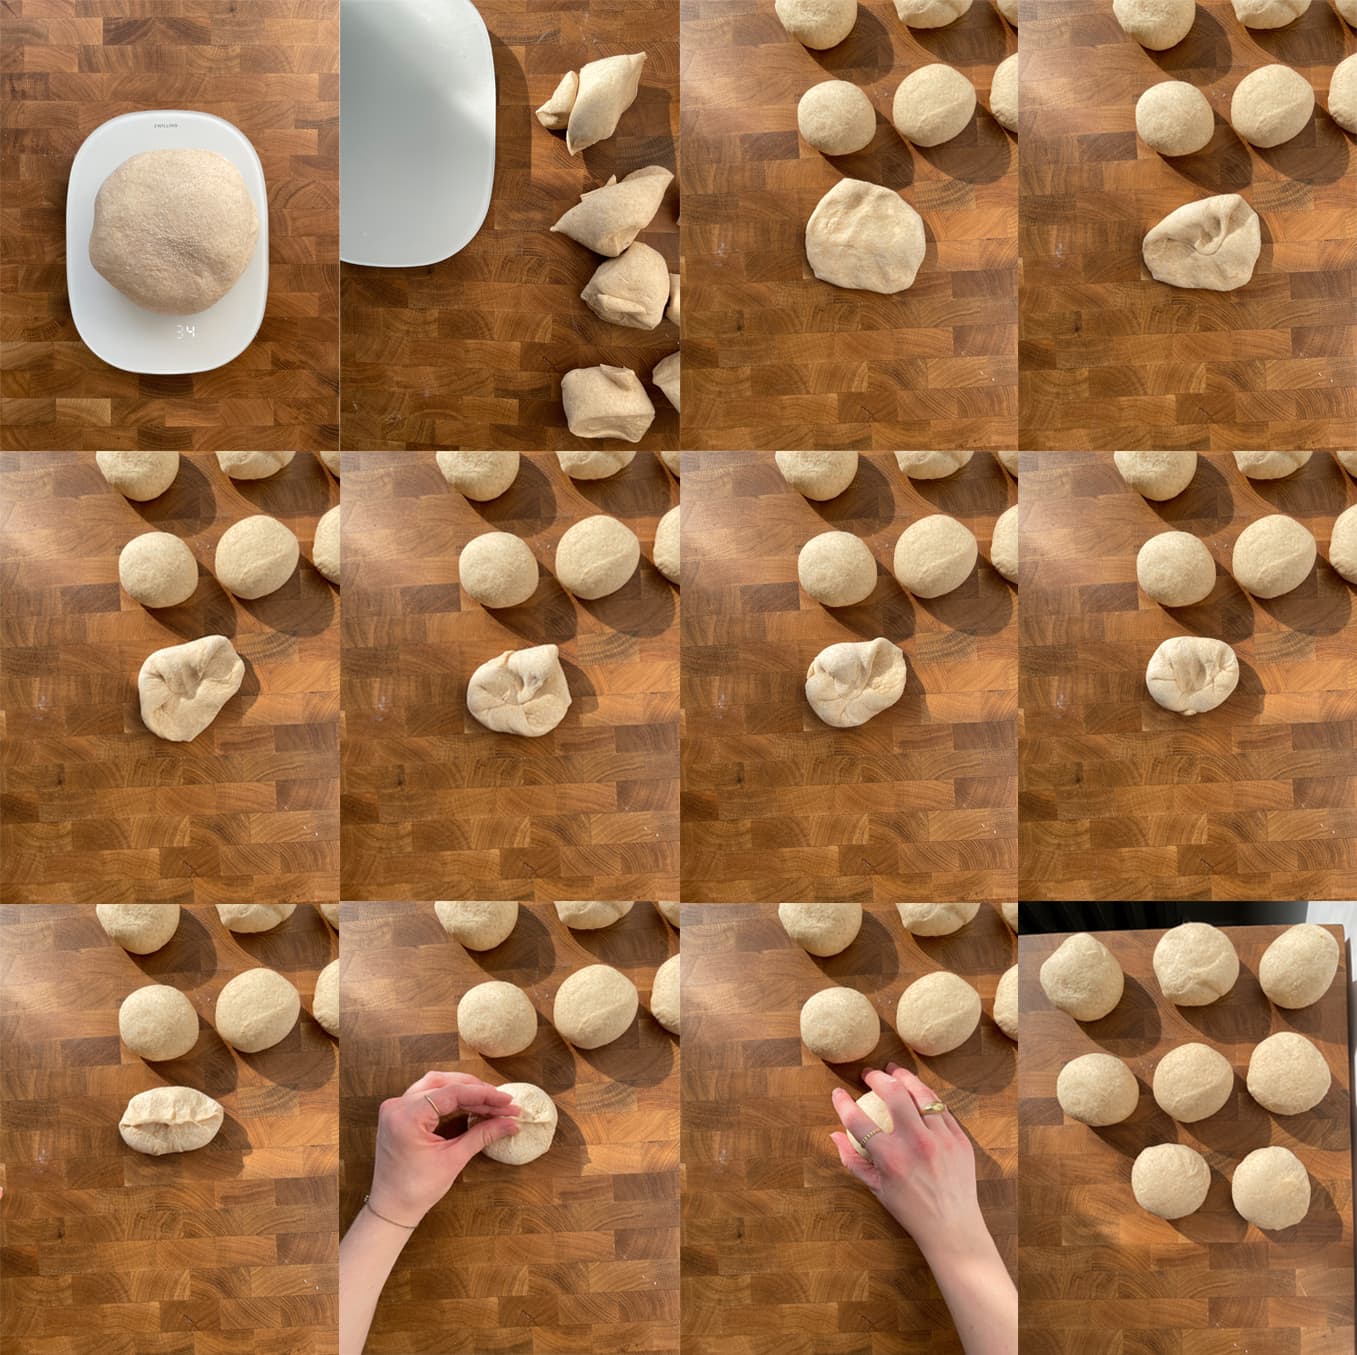 Process images for dividing pretzel roll dough and shaping the rolls. 